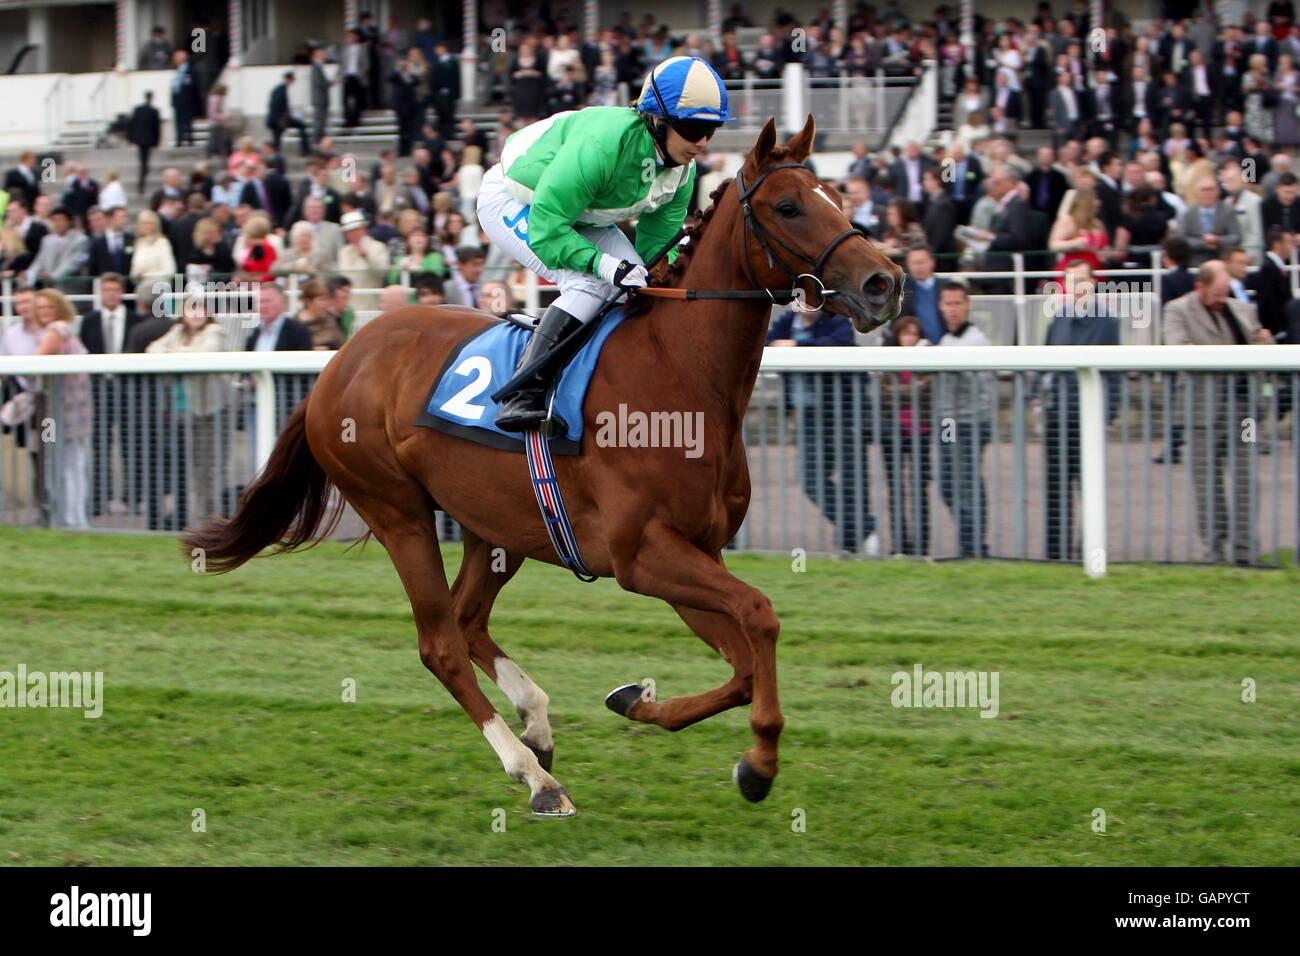 Bahamian Babe ridden by Hayley Turner competes in the Emirates Airline Yorkshire Cup at York racecourse Stock Photo